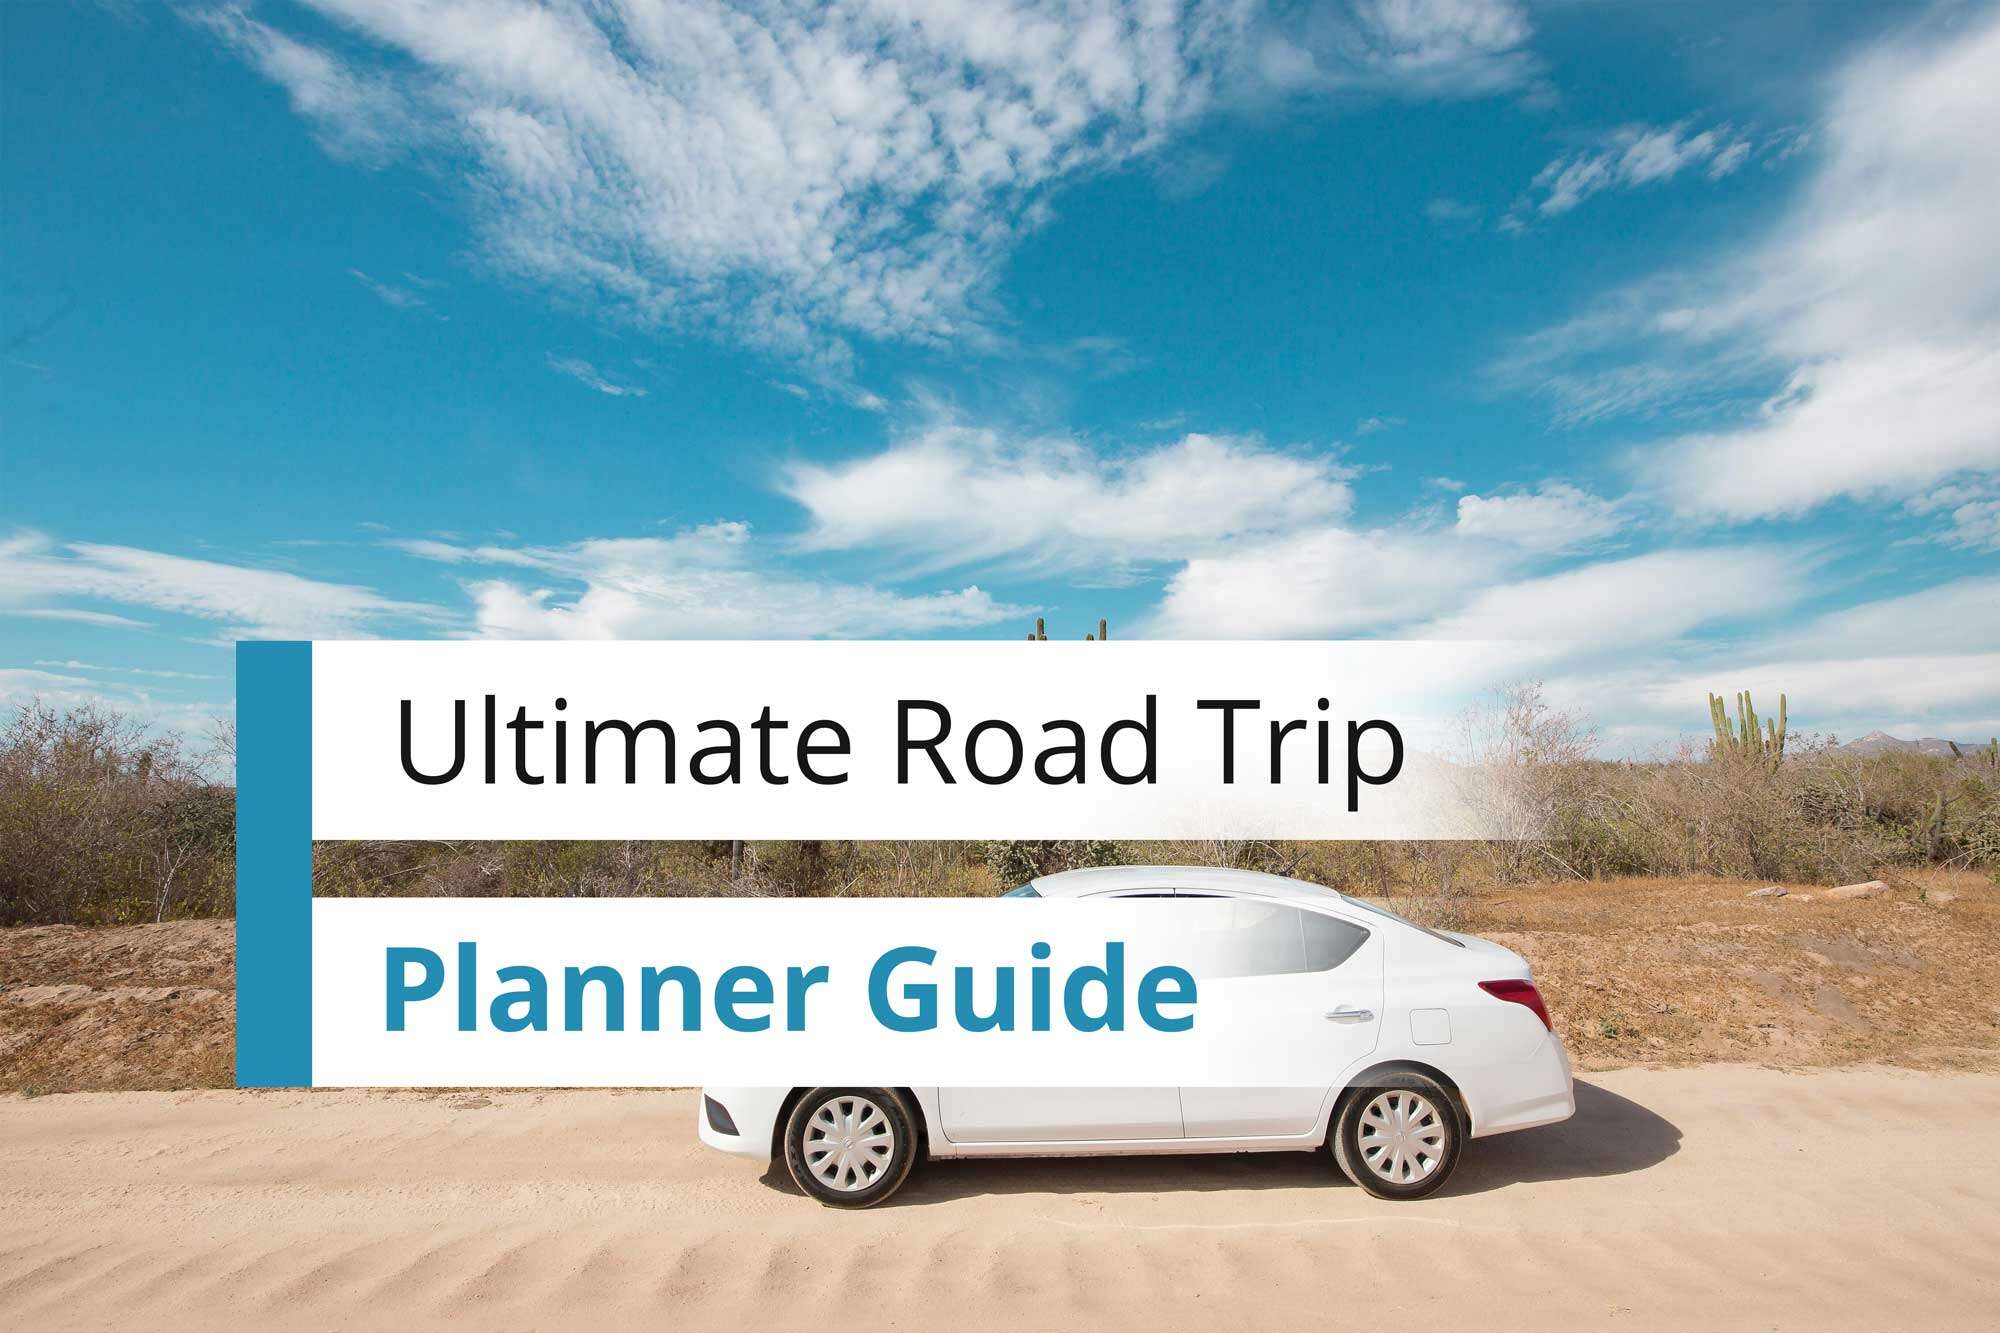 Ultimate Road Trip Planner Guide: How To Plan A Road Trip